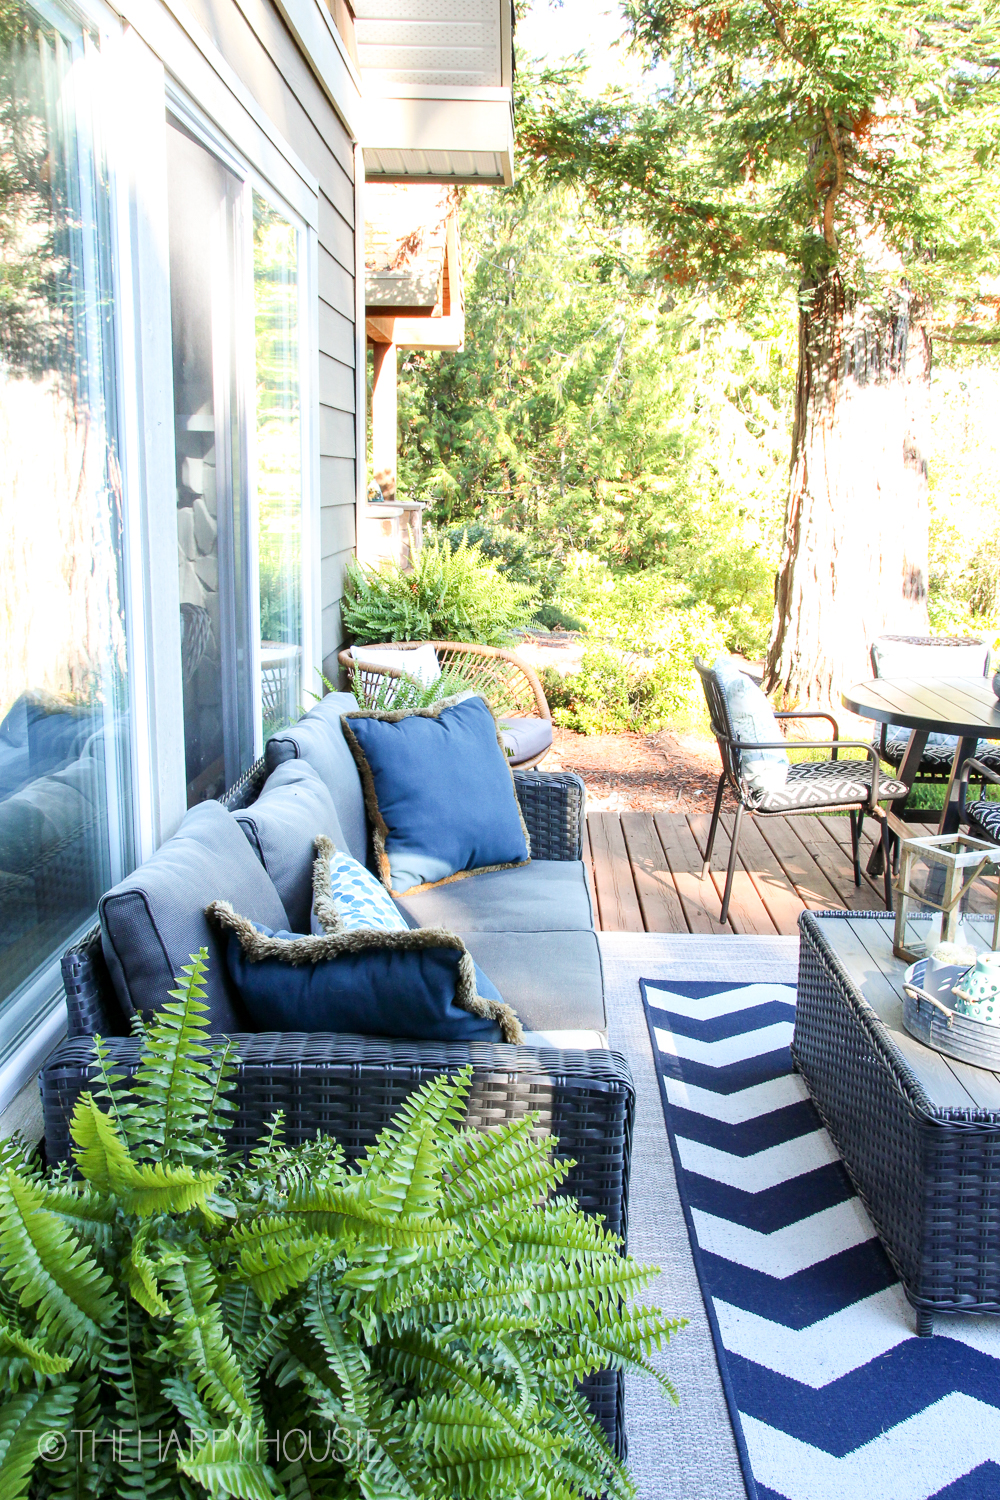 An outdoor sofa, a blue and white rug and an outdoor coffee table on the back deck.